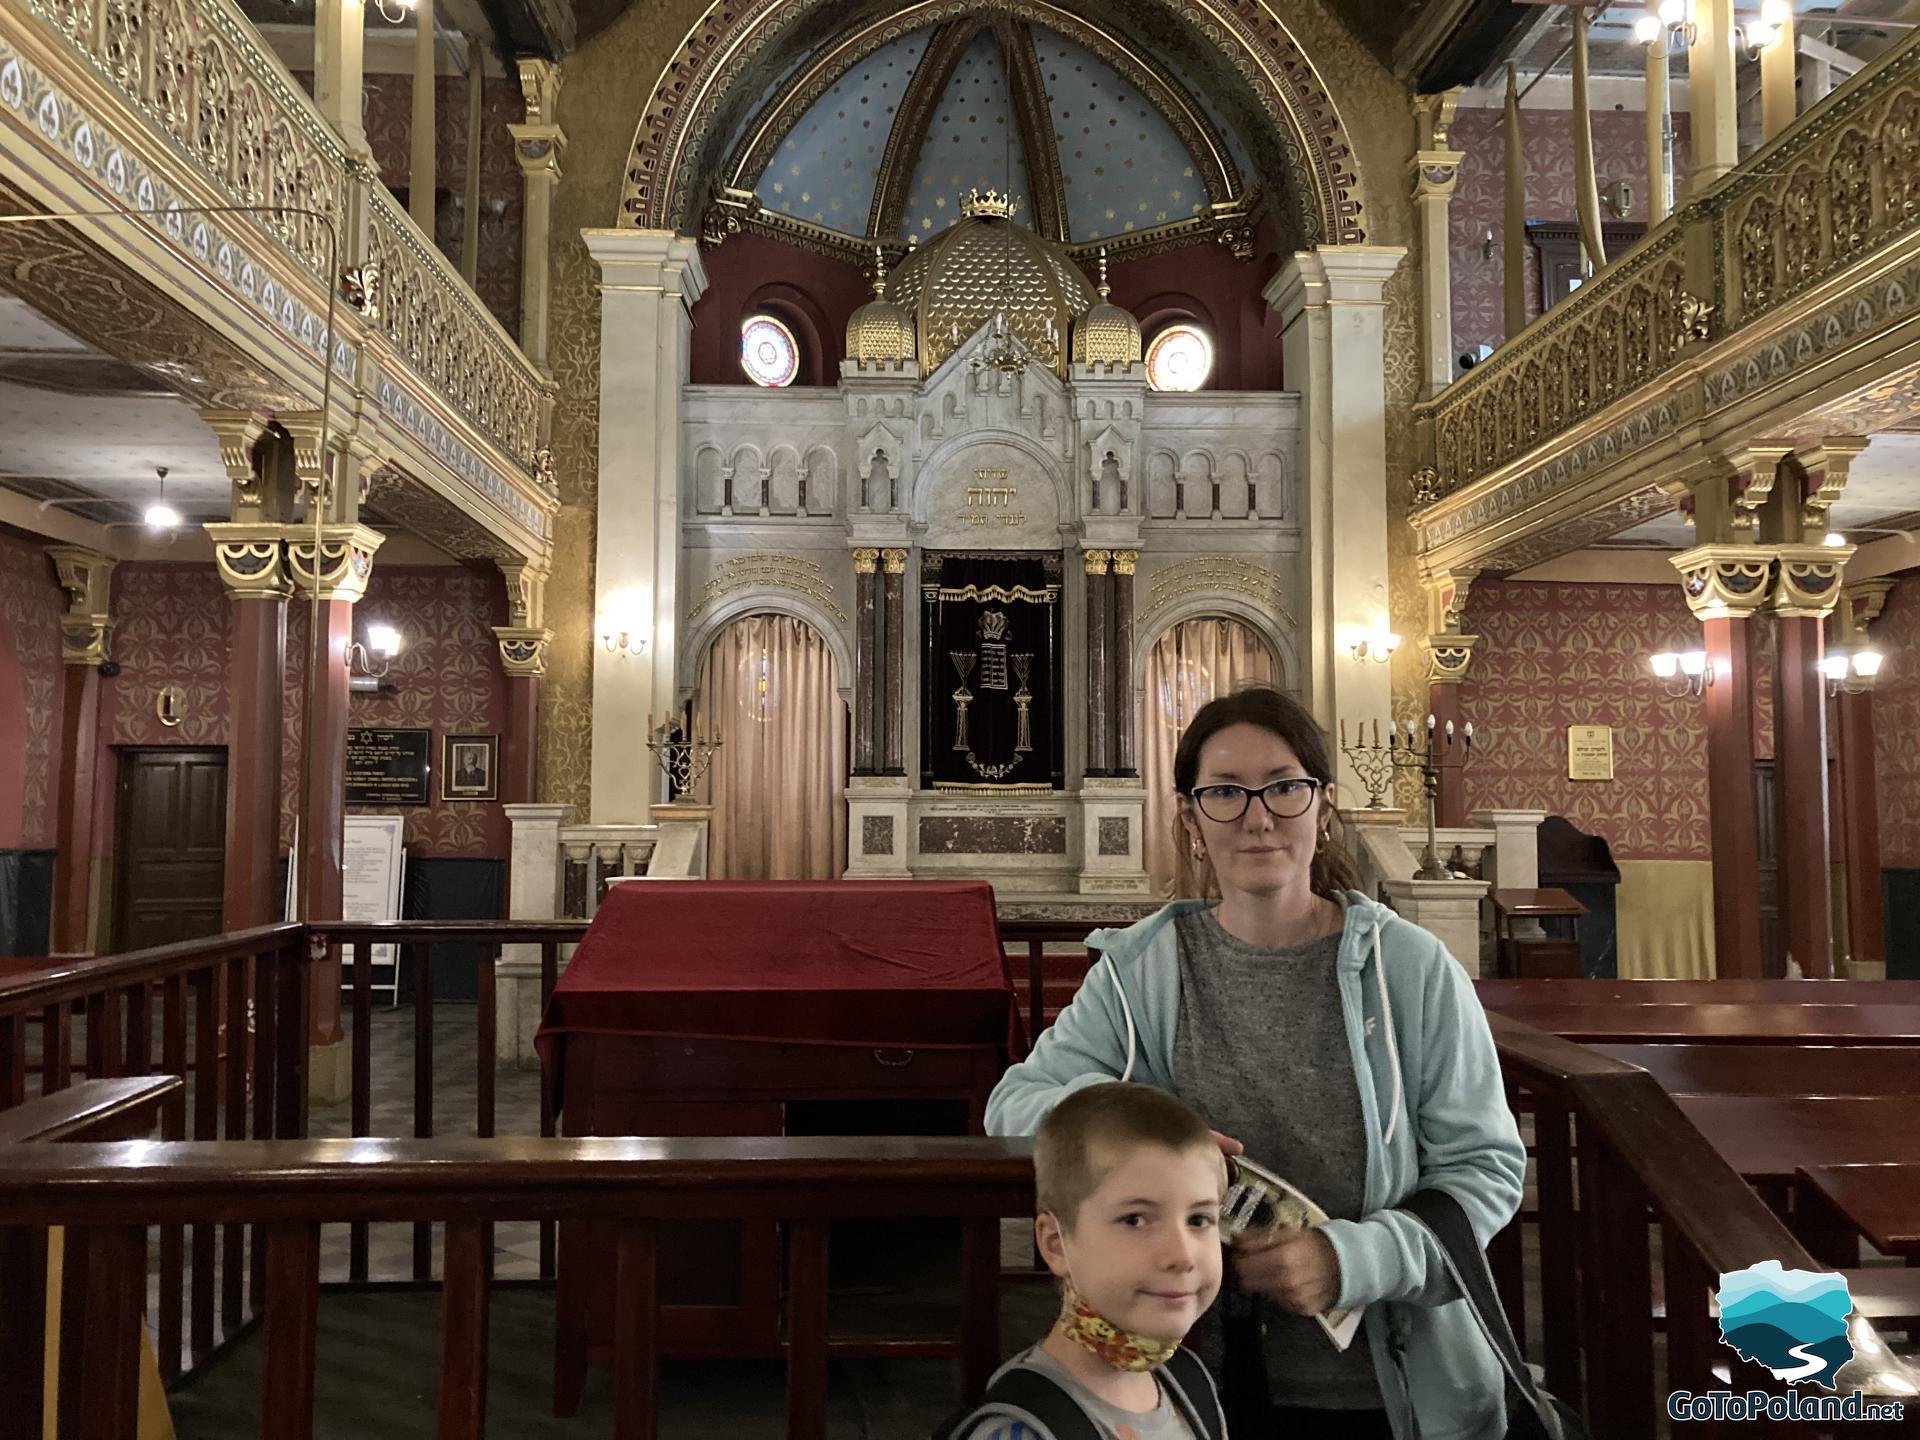 a boy and a woman are in a synagogue, behind them there is an altar cabinet used to store the Torah scrolls